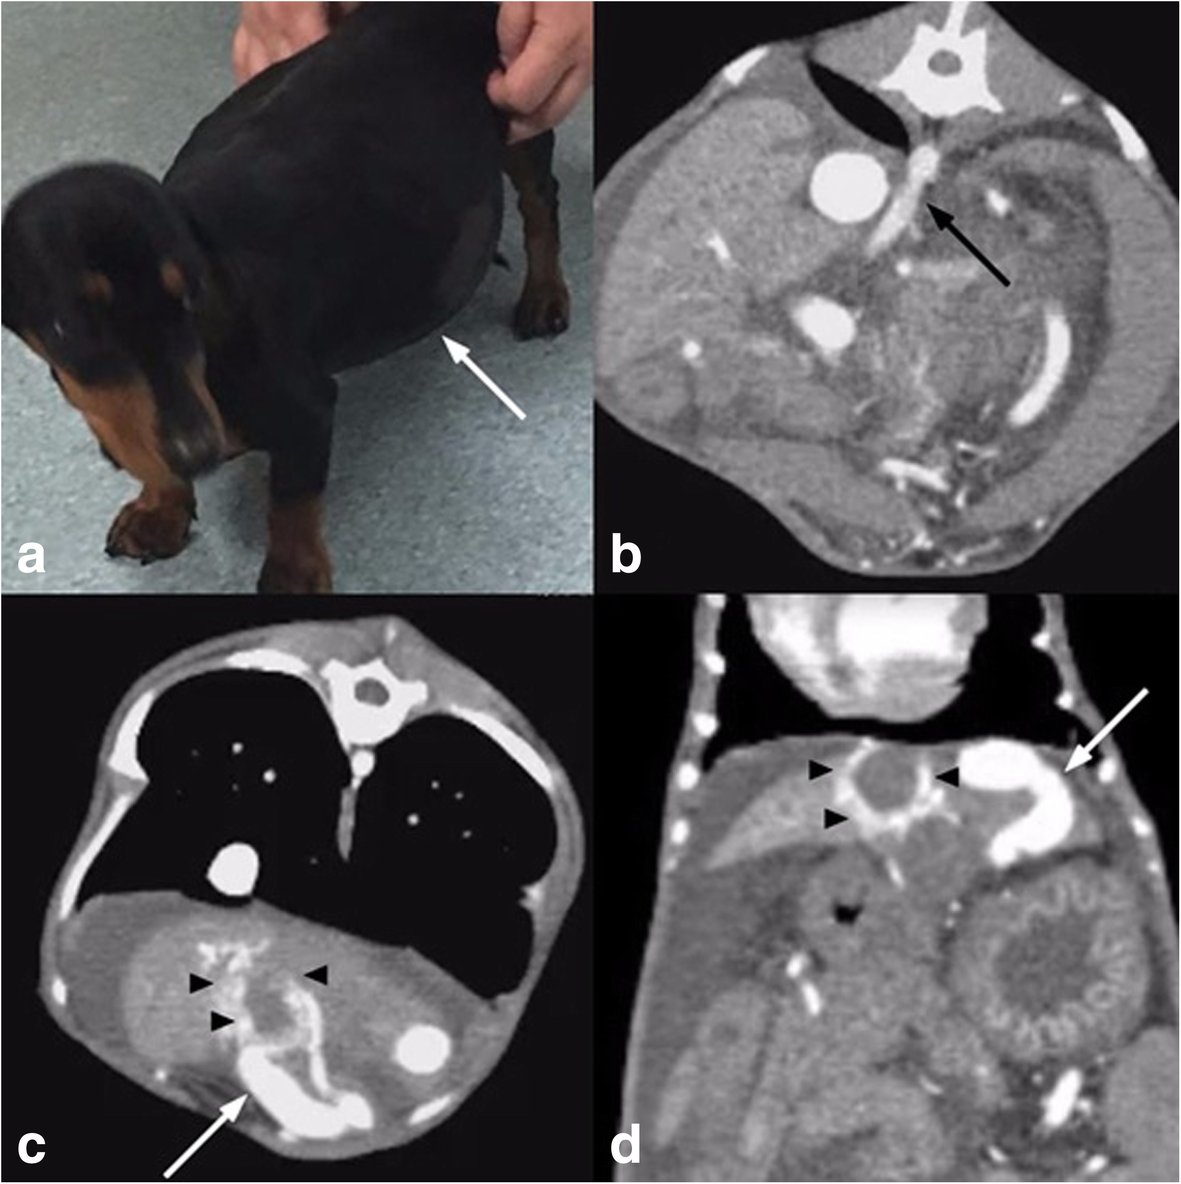 This study describes the use of the ‘pressure cooker’ technique for canine #HAVMs and novel use of PHIL and the Scepter XC balloon catheter, which may offer advantages over comventional endovascular techniques: cvirendovasc.springeropen.com/articles/10.11… #IRad